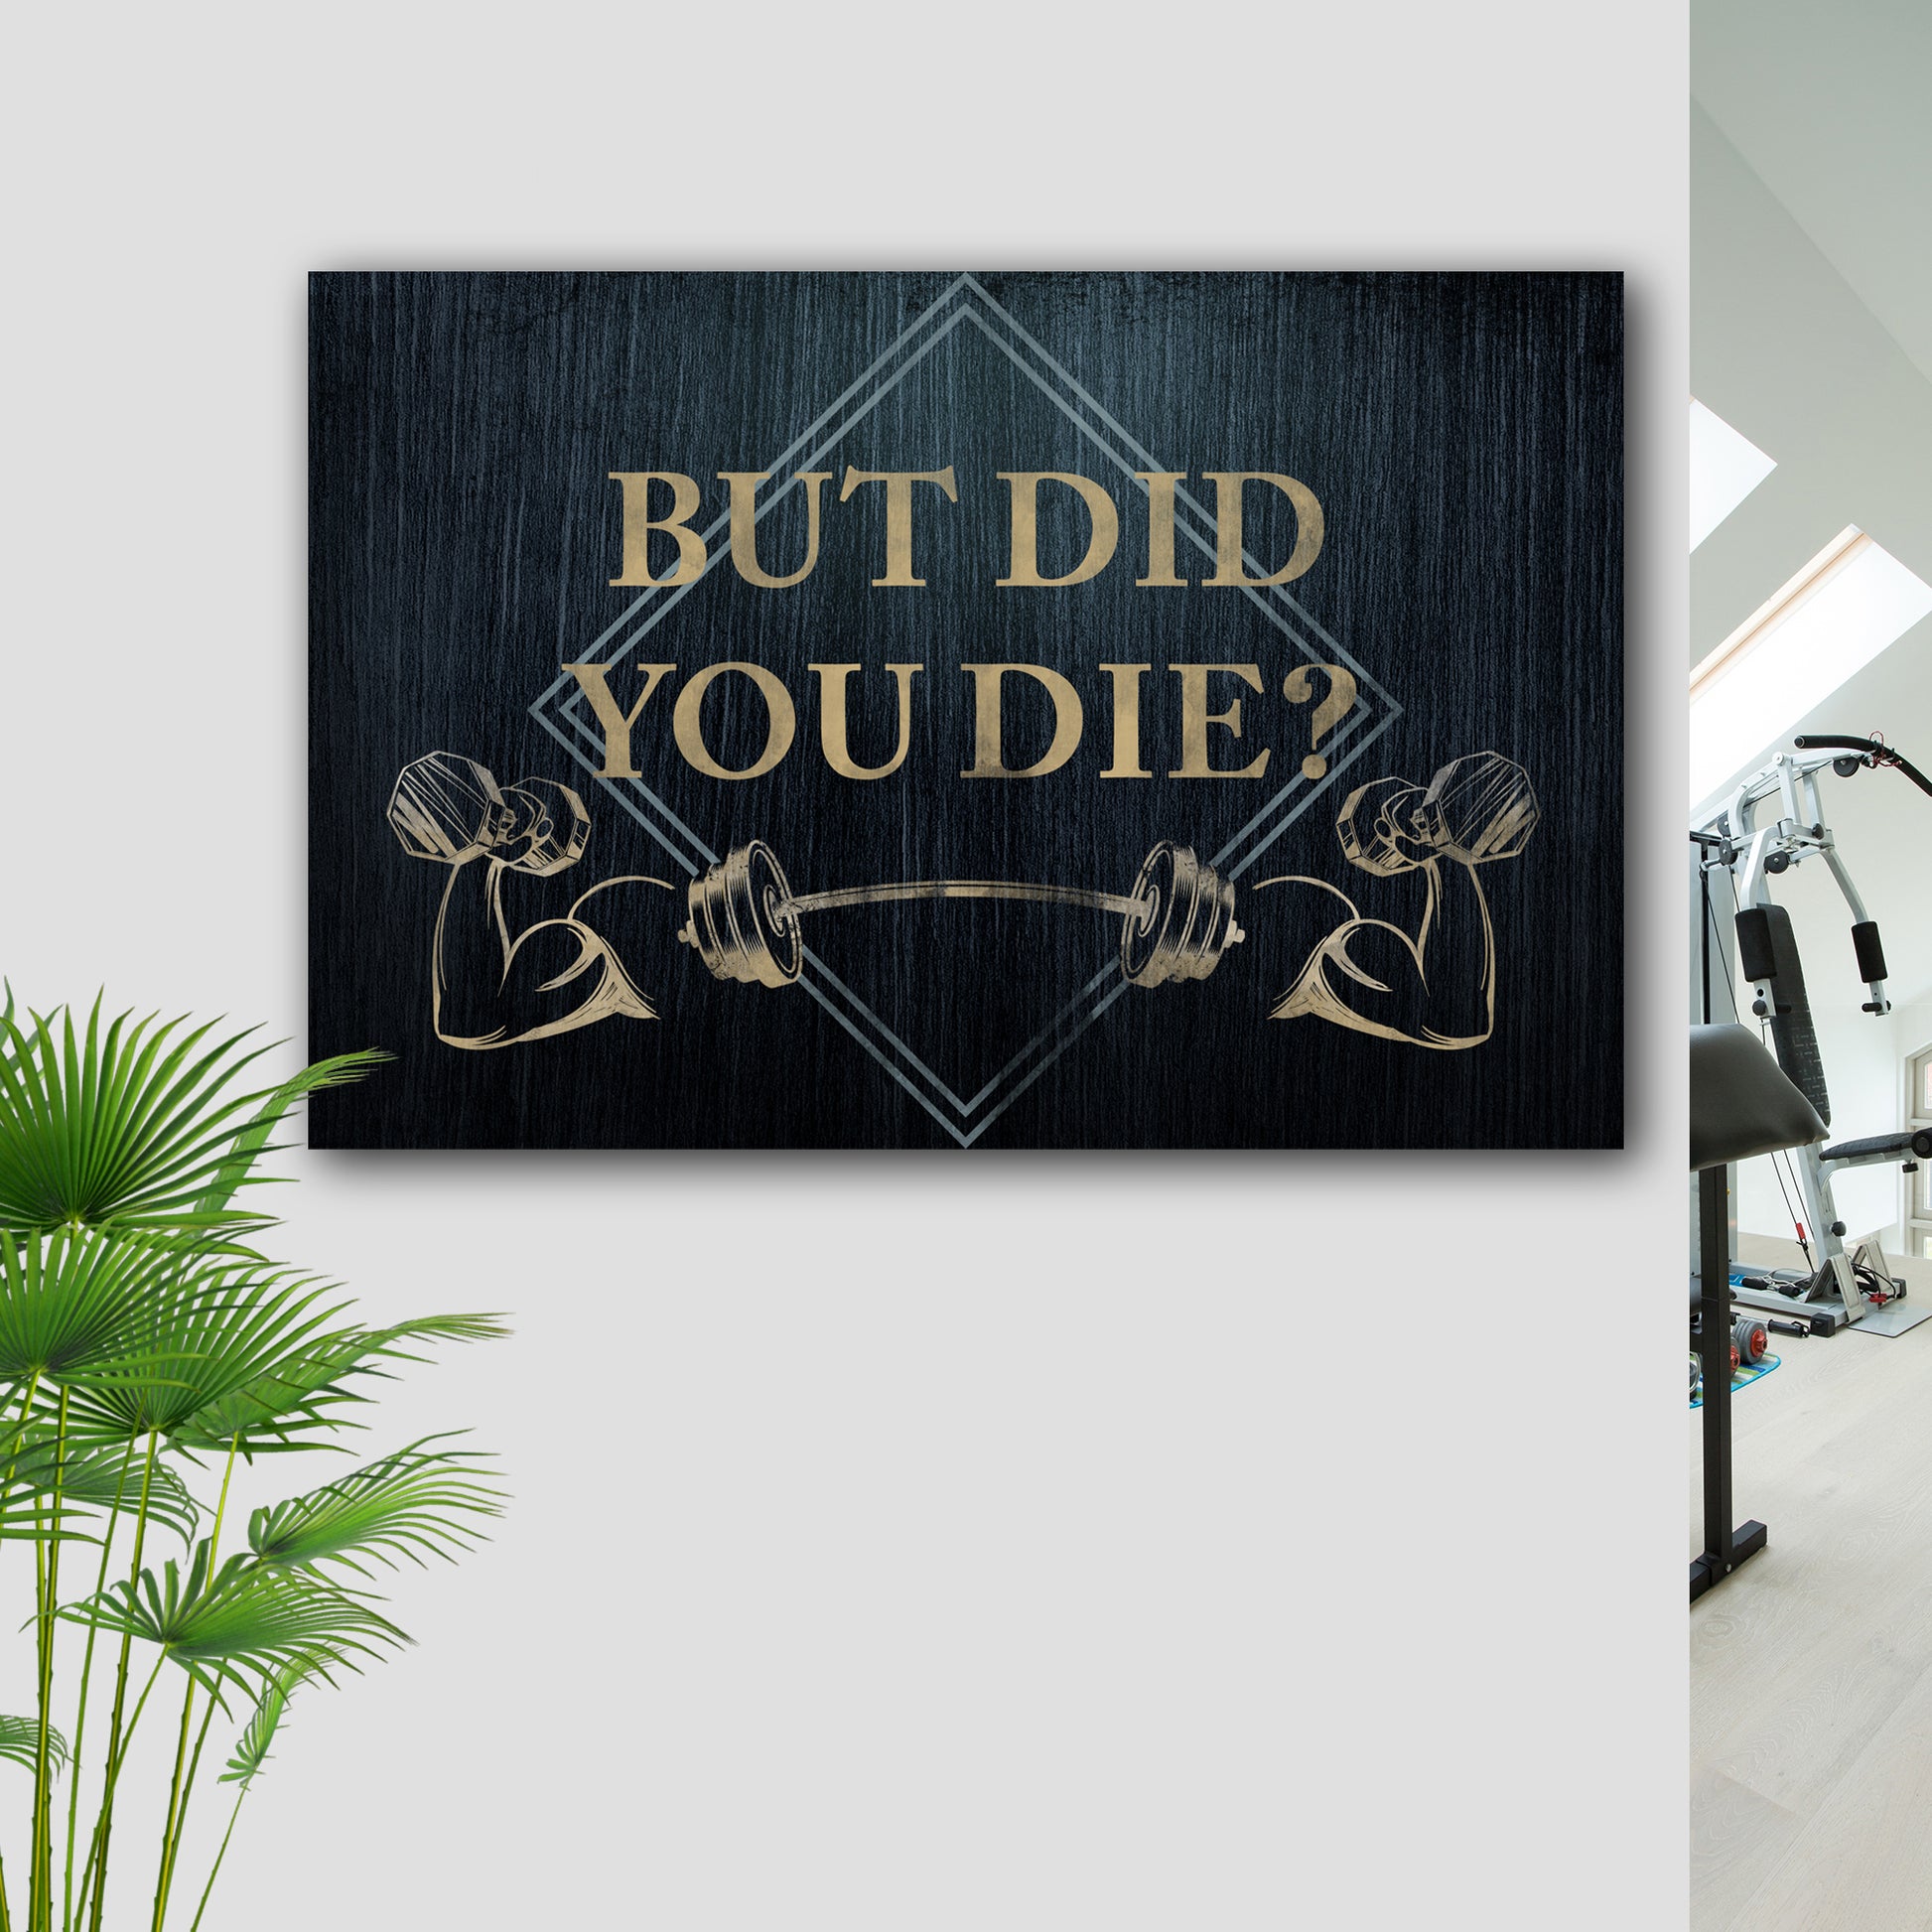 Did You Die? Gym Sign - Image by Tailored Canvases